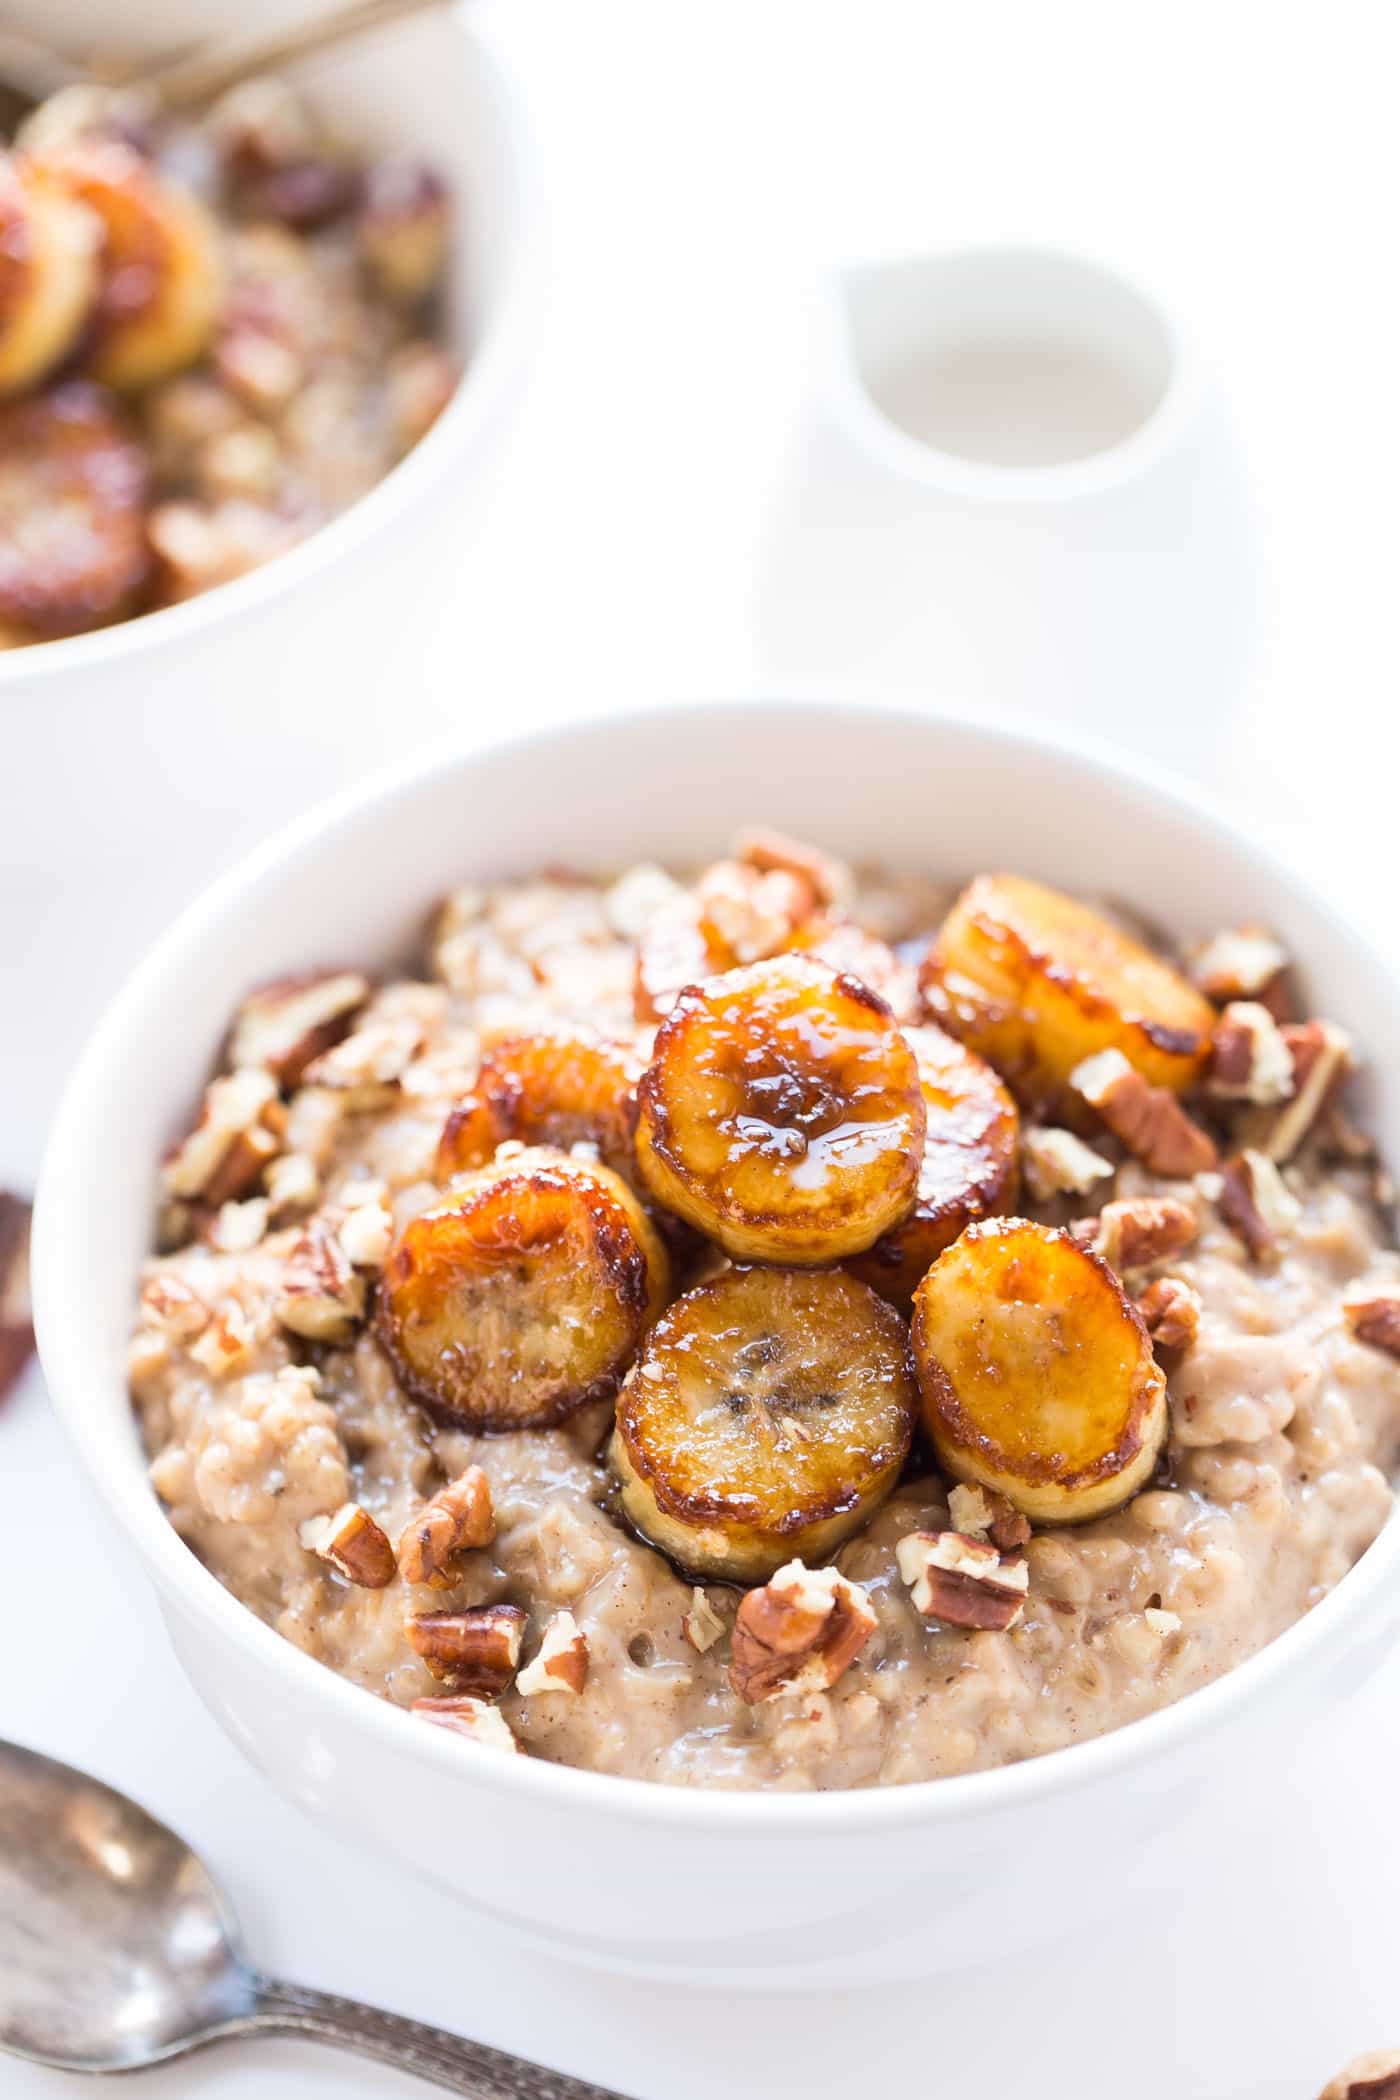 Learn how to make the CREAMIEST steel cut oats on the planet! With an even more delicious Caramelized Bananas on top!